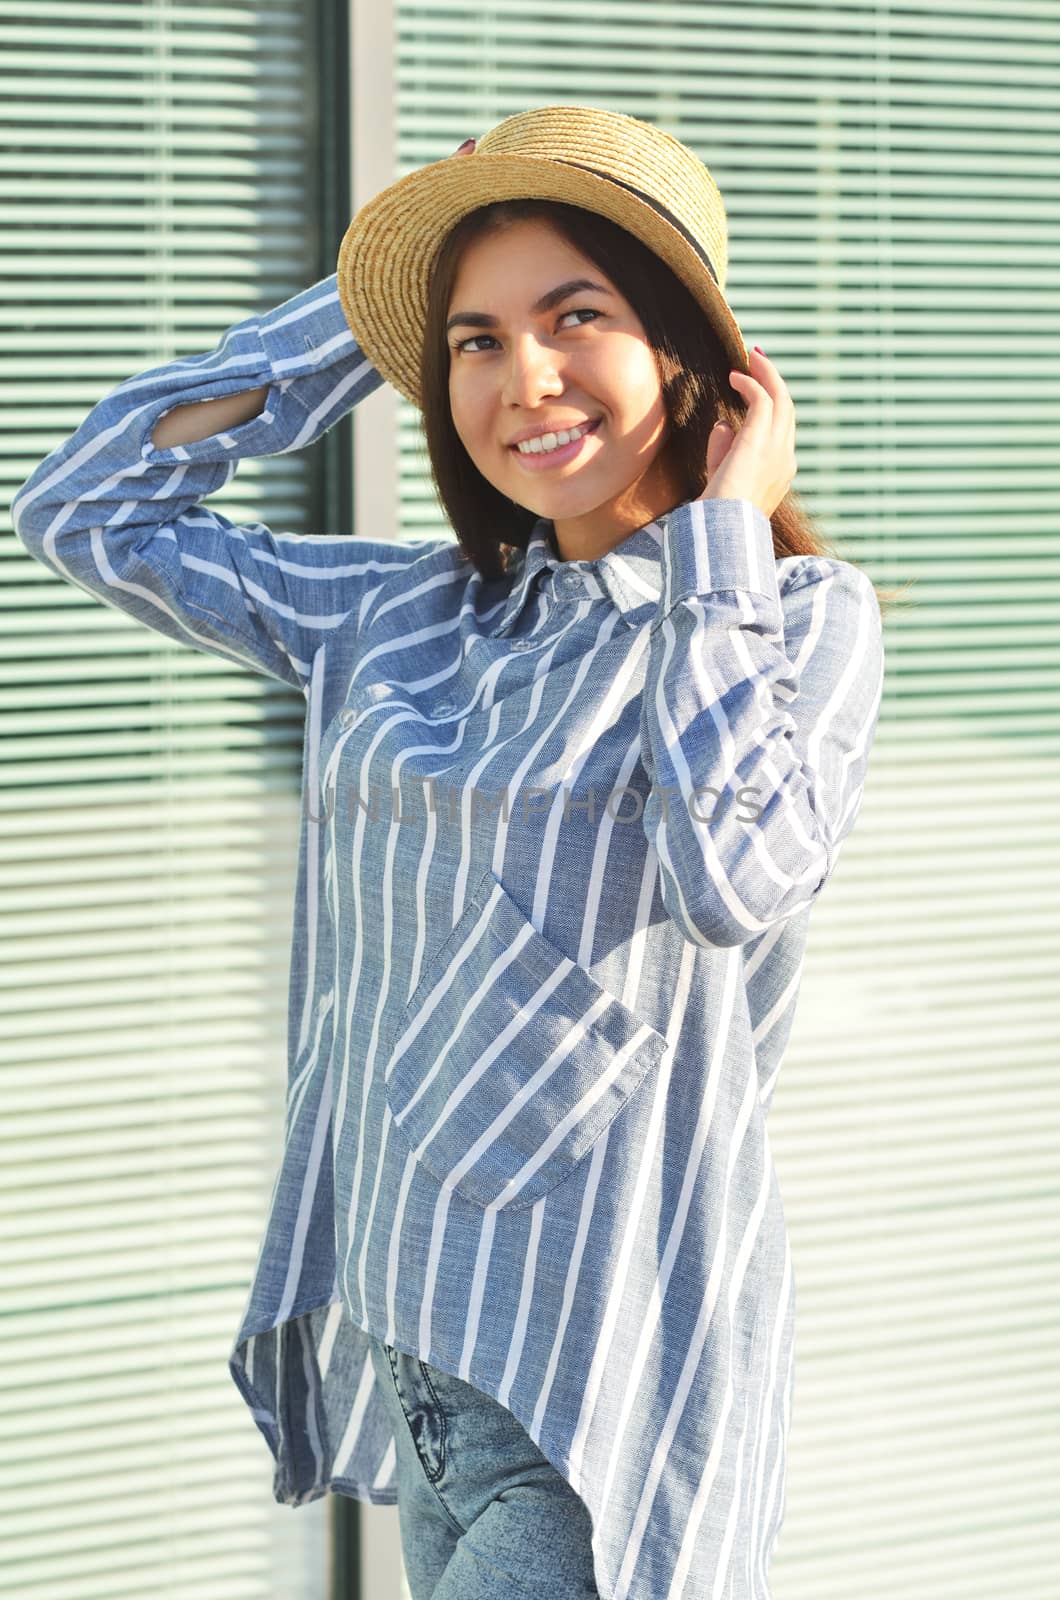 Portrait of a young girl is standing near the wall in a hat, and she is dressed in blue striped shirt by xzgorik